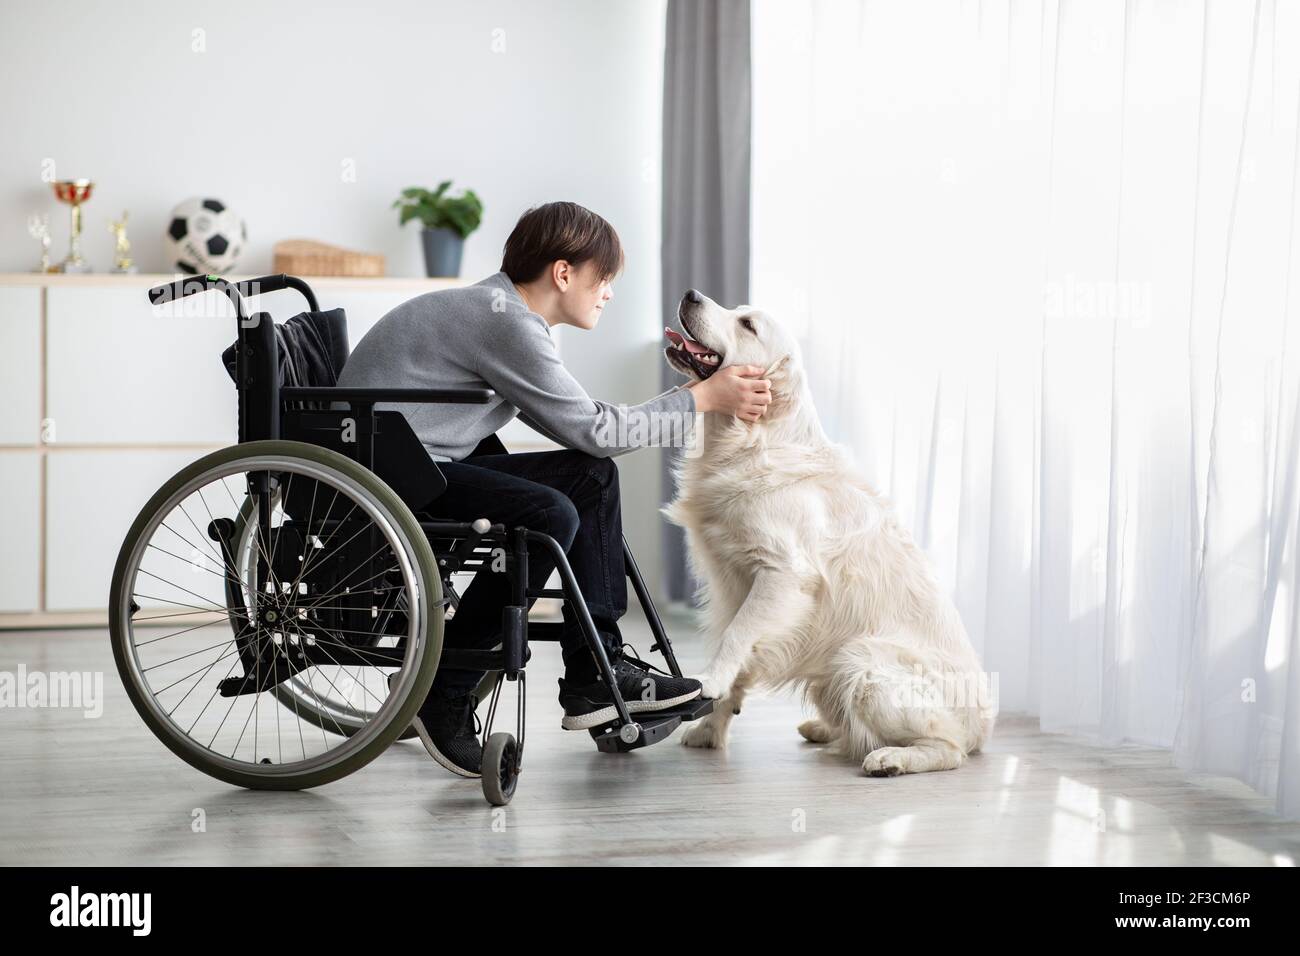 Positive handicapped adolescent playing with his dog, petting golden retriever at home Stock Photo